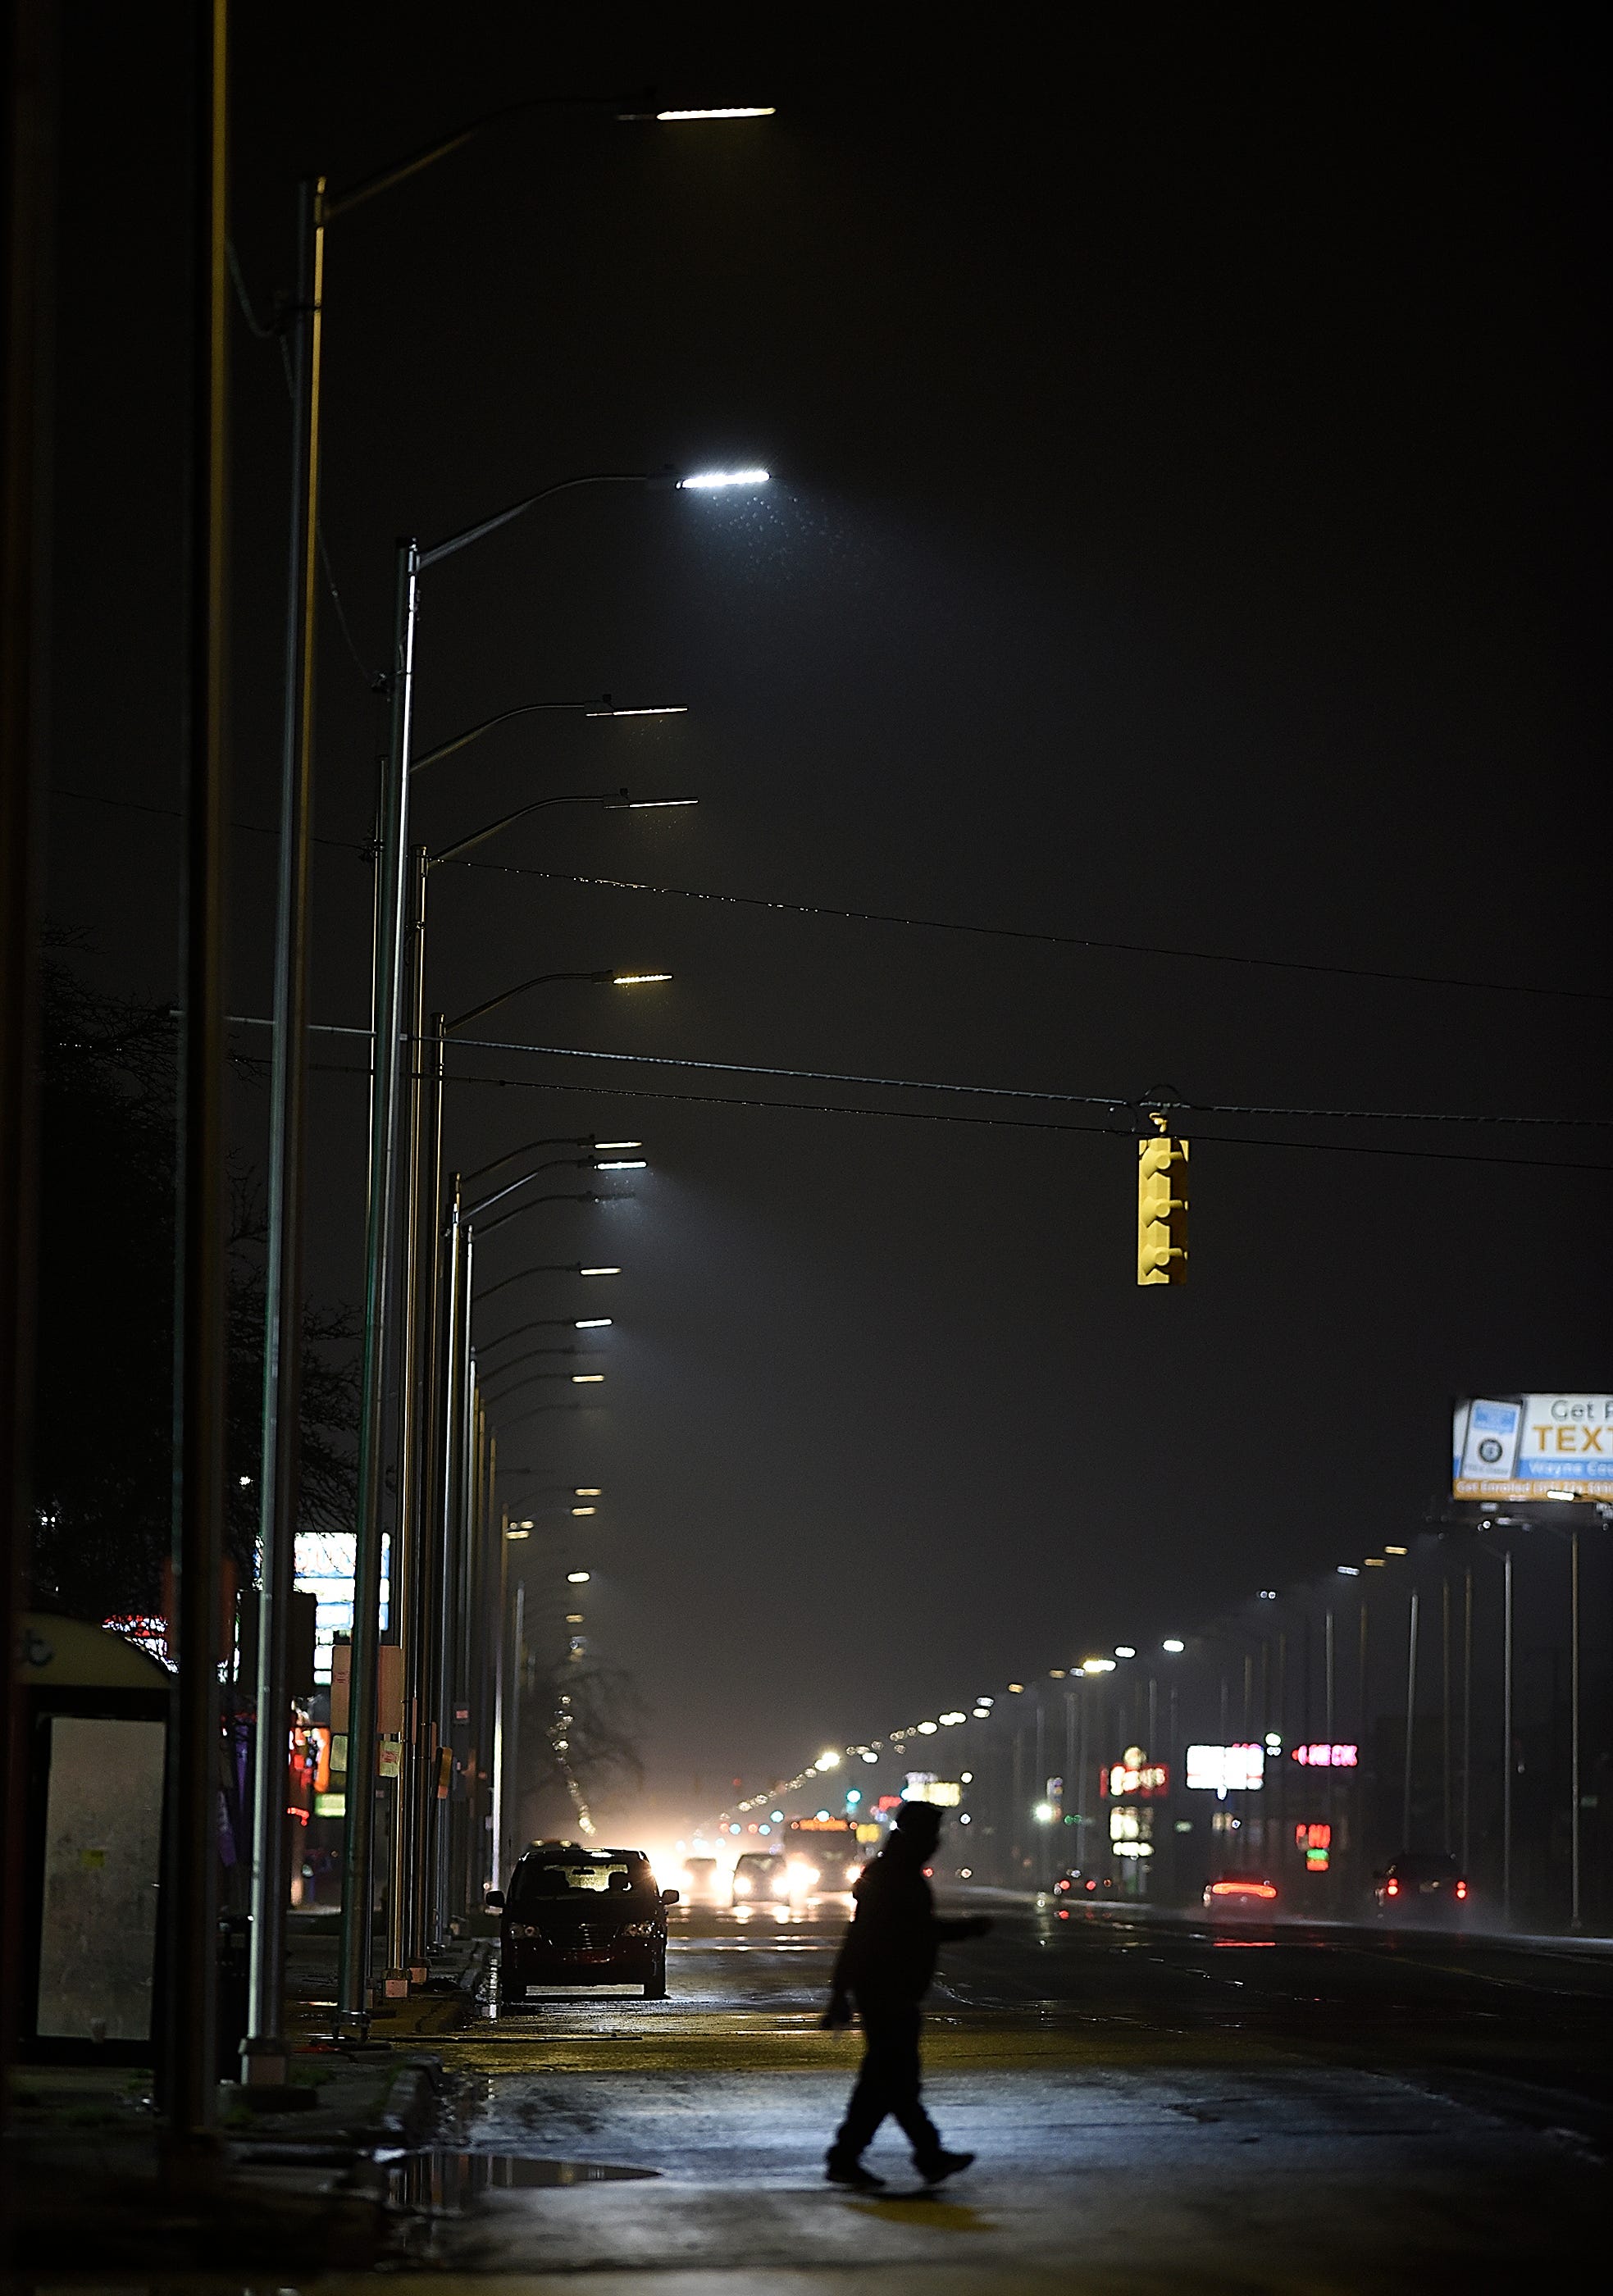 The Public Lighting Authority in its complaint against Leotek Electronics USA notes that upward of 20,000 LED lights are "prematurely dimming and burning out" and putting the city's revitalization progress "in jeopardy."